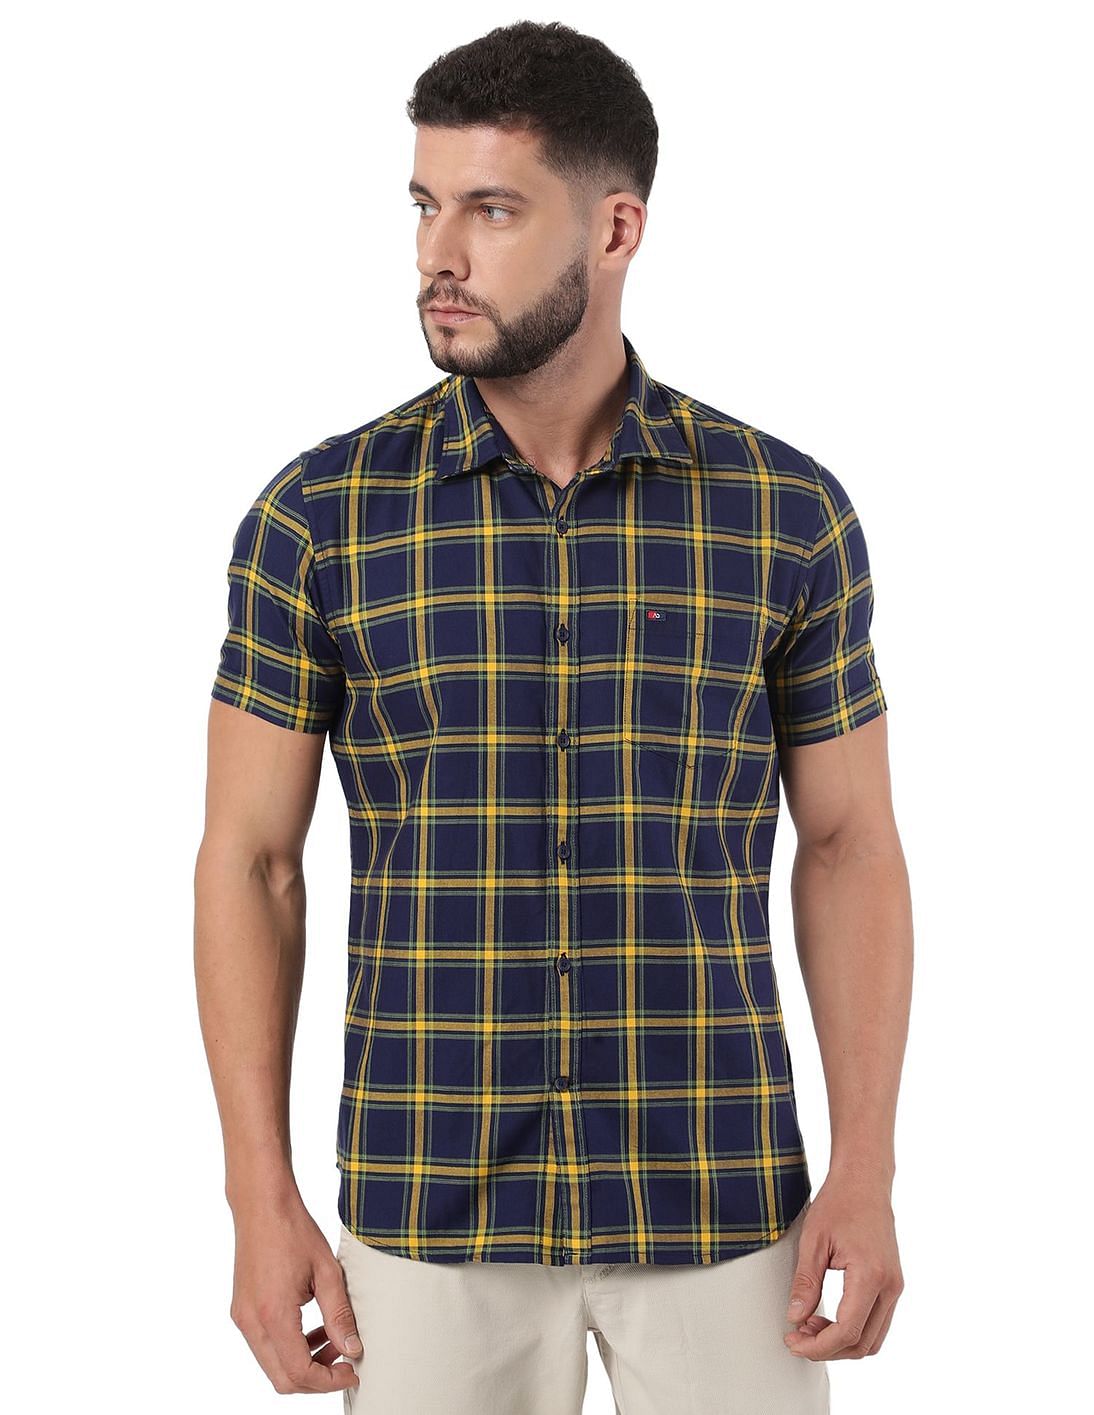 Buy AD by Arvind Short Sleeve Check Casual Shirt - NNNOW.com